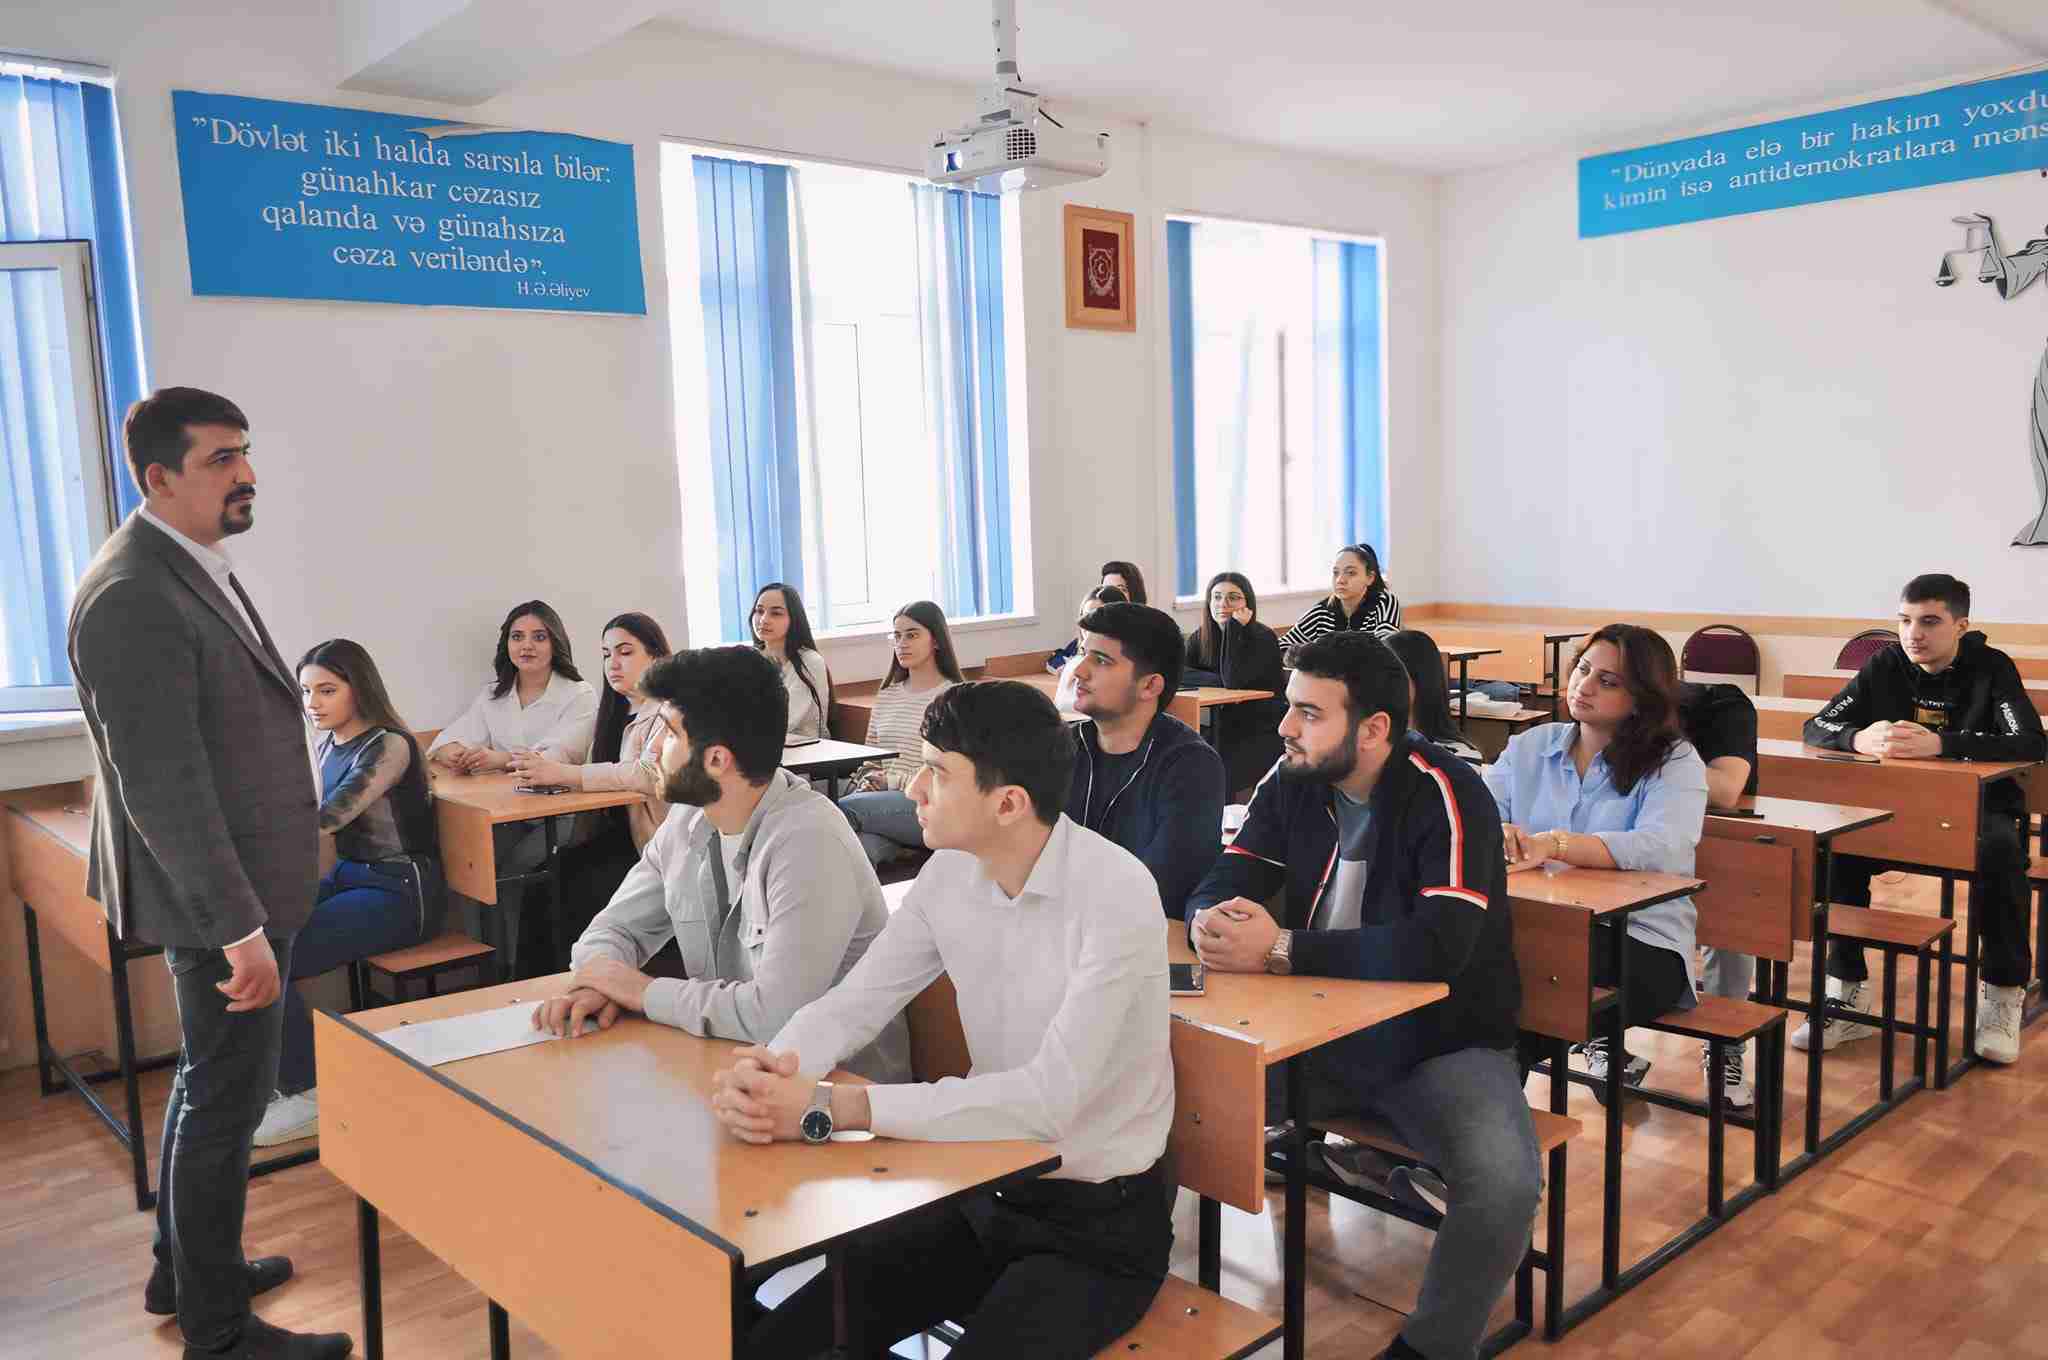 Trainings were held for students studying at OYU and directed to industrial experience